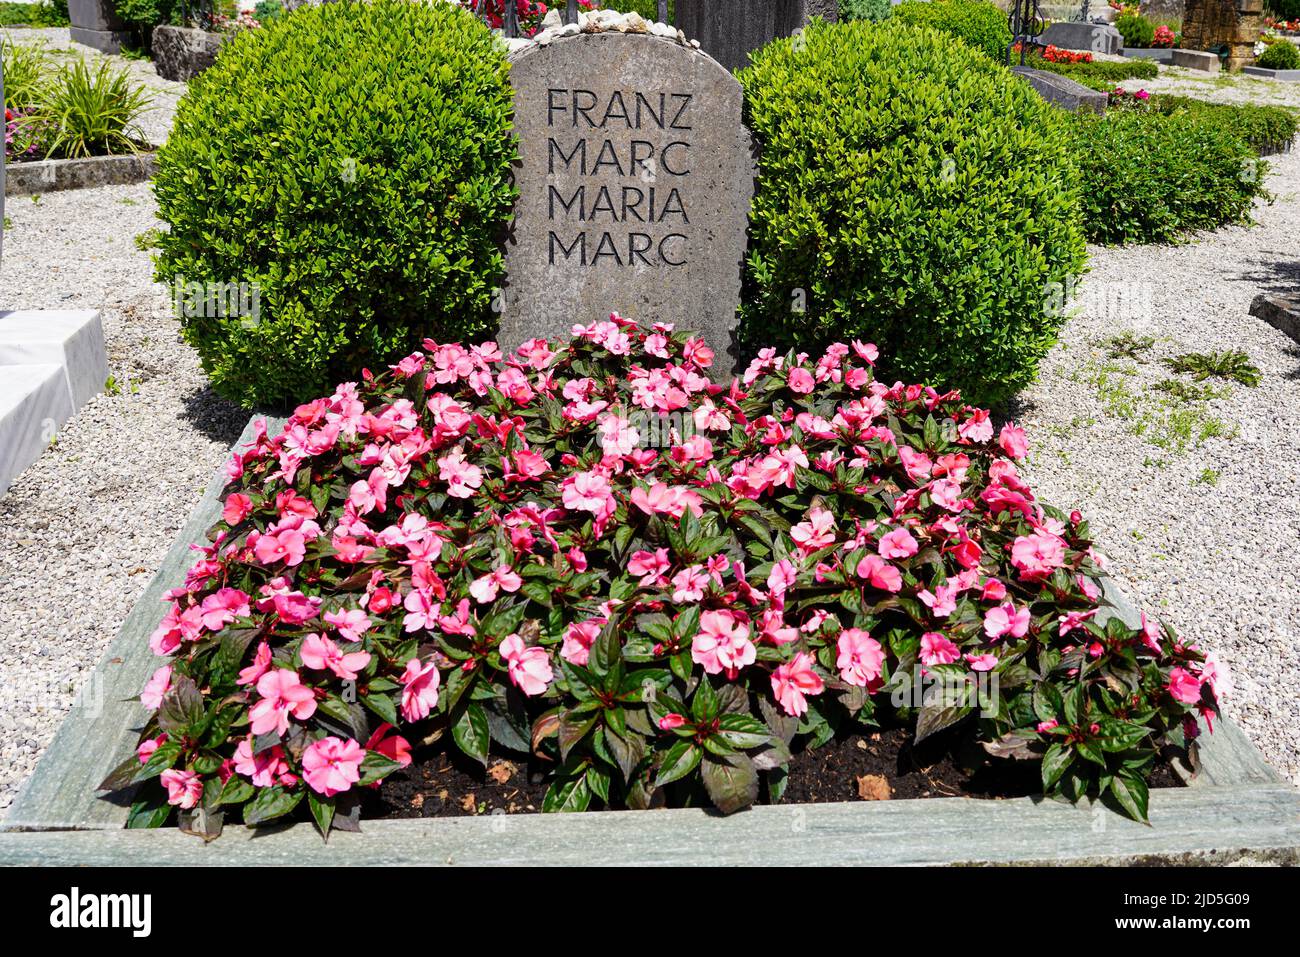 Grave of painter and Der Blaue Reiter member Franz Marc and his wife Maria at the cemetery of St. Michael church, Kochel, Bavaria, Germany, 18.6.22 Stock Photo